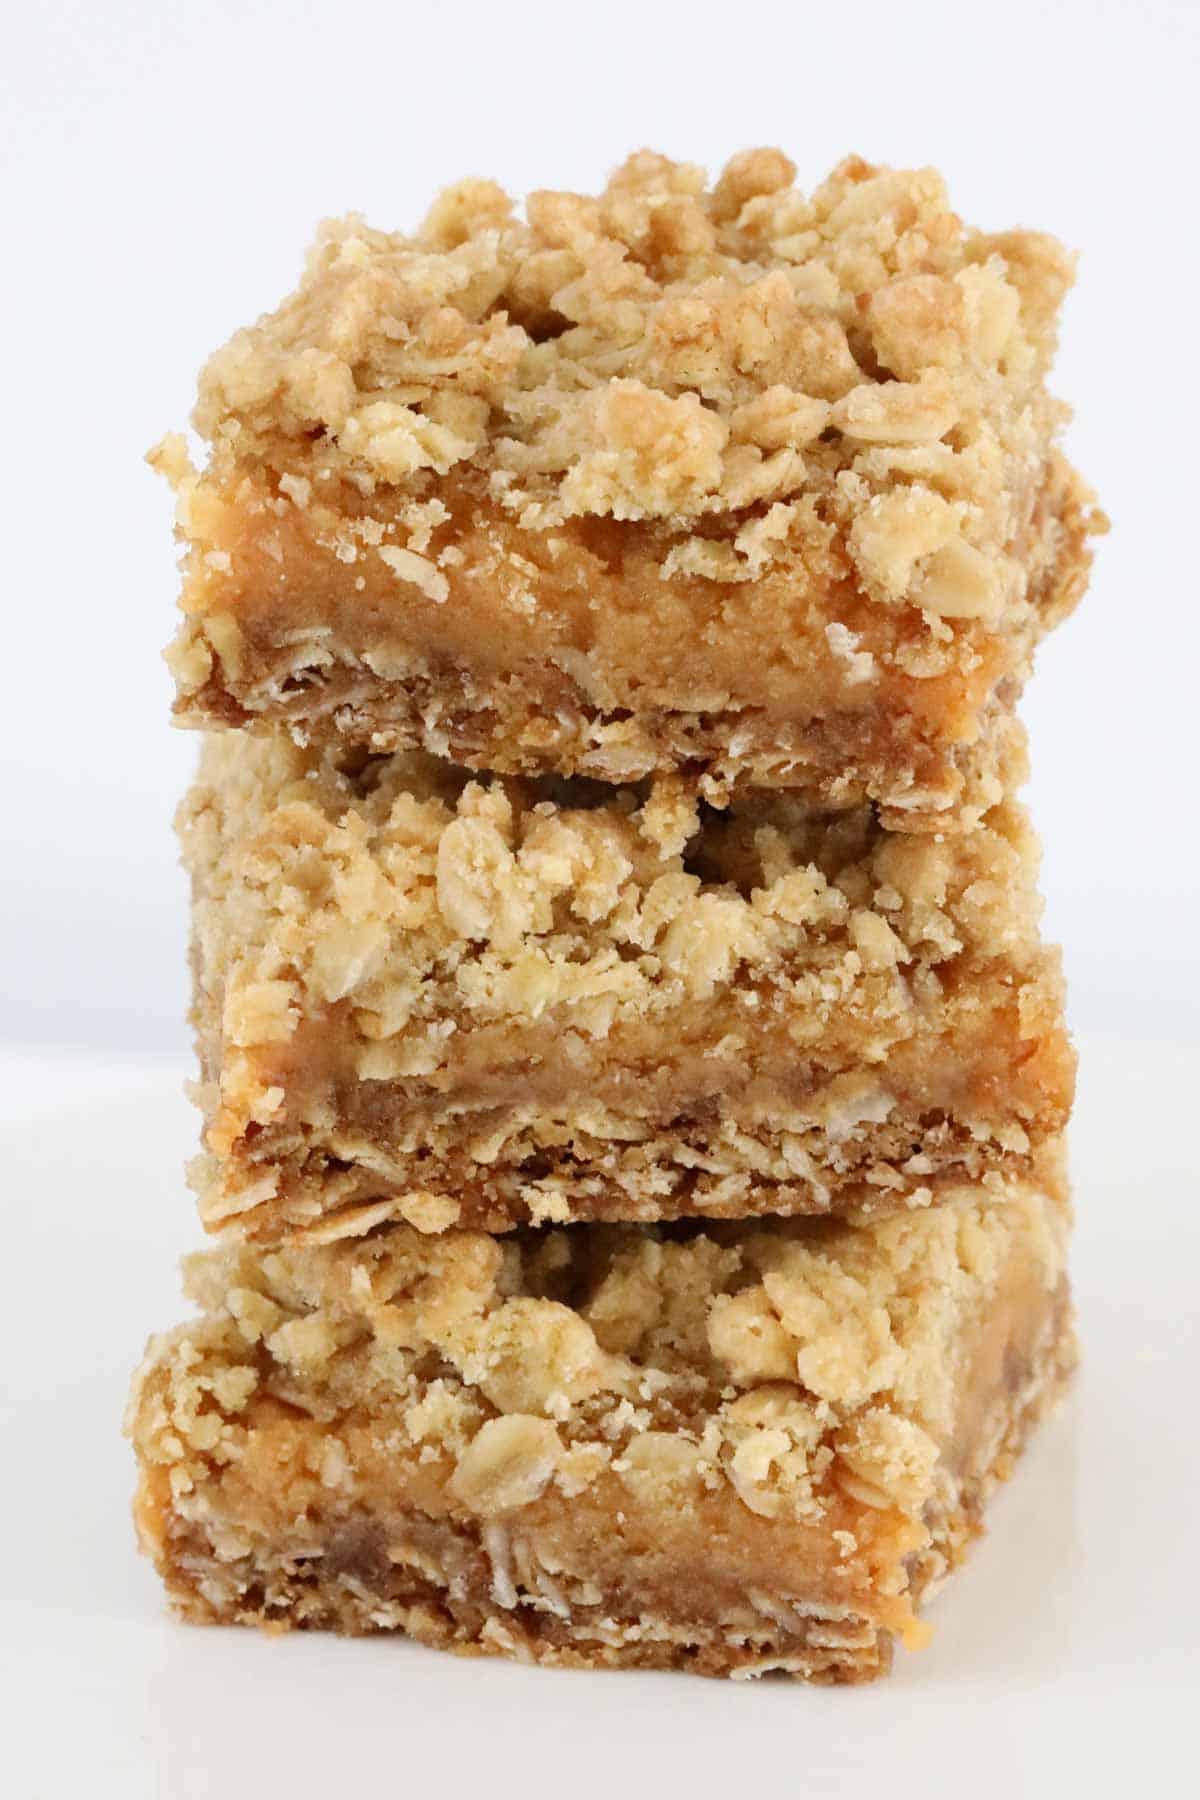 A close up of oaty caramel crumble squares.